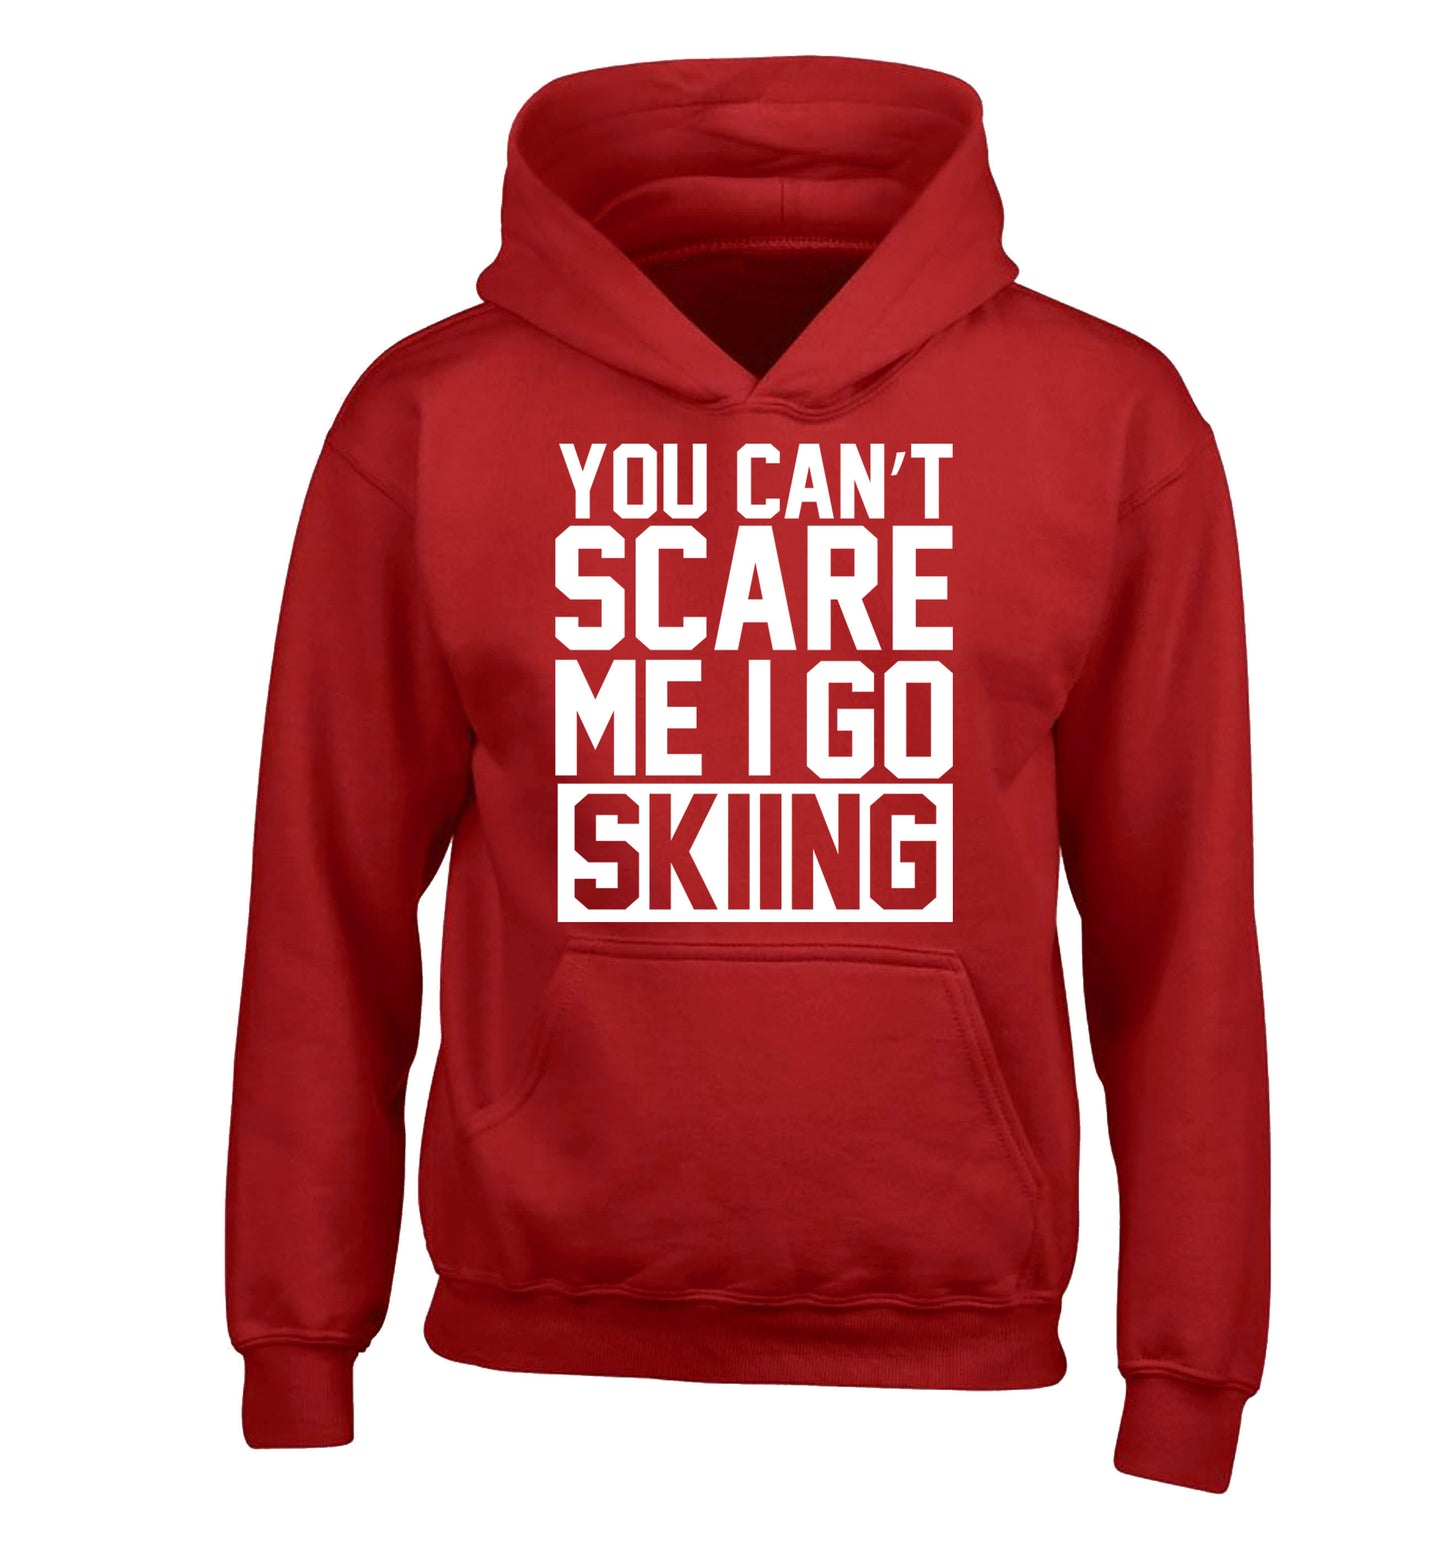 You can't scare me I go skiing children's red hoodie 12-14 Years